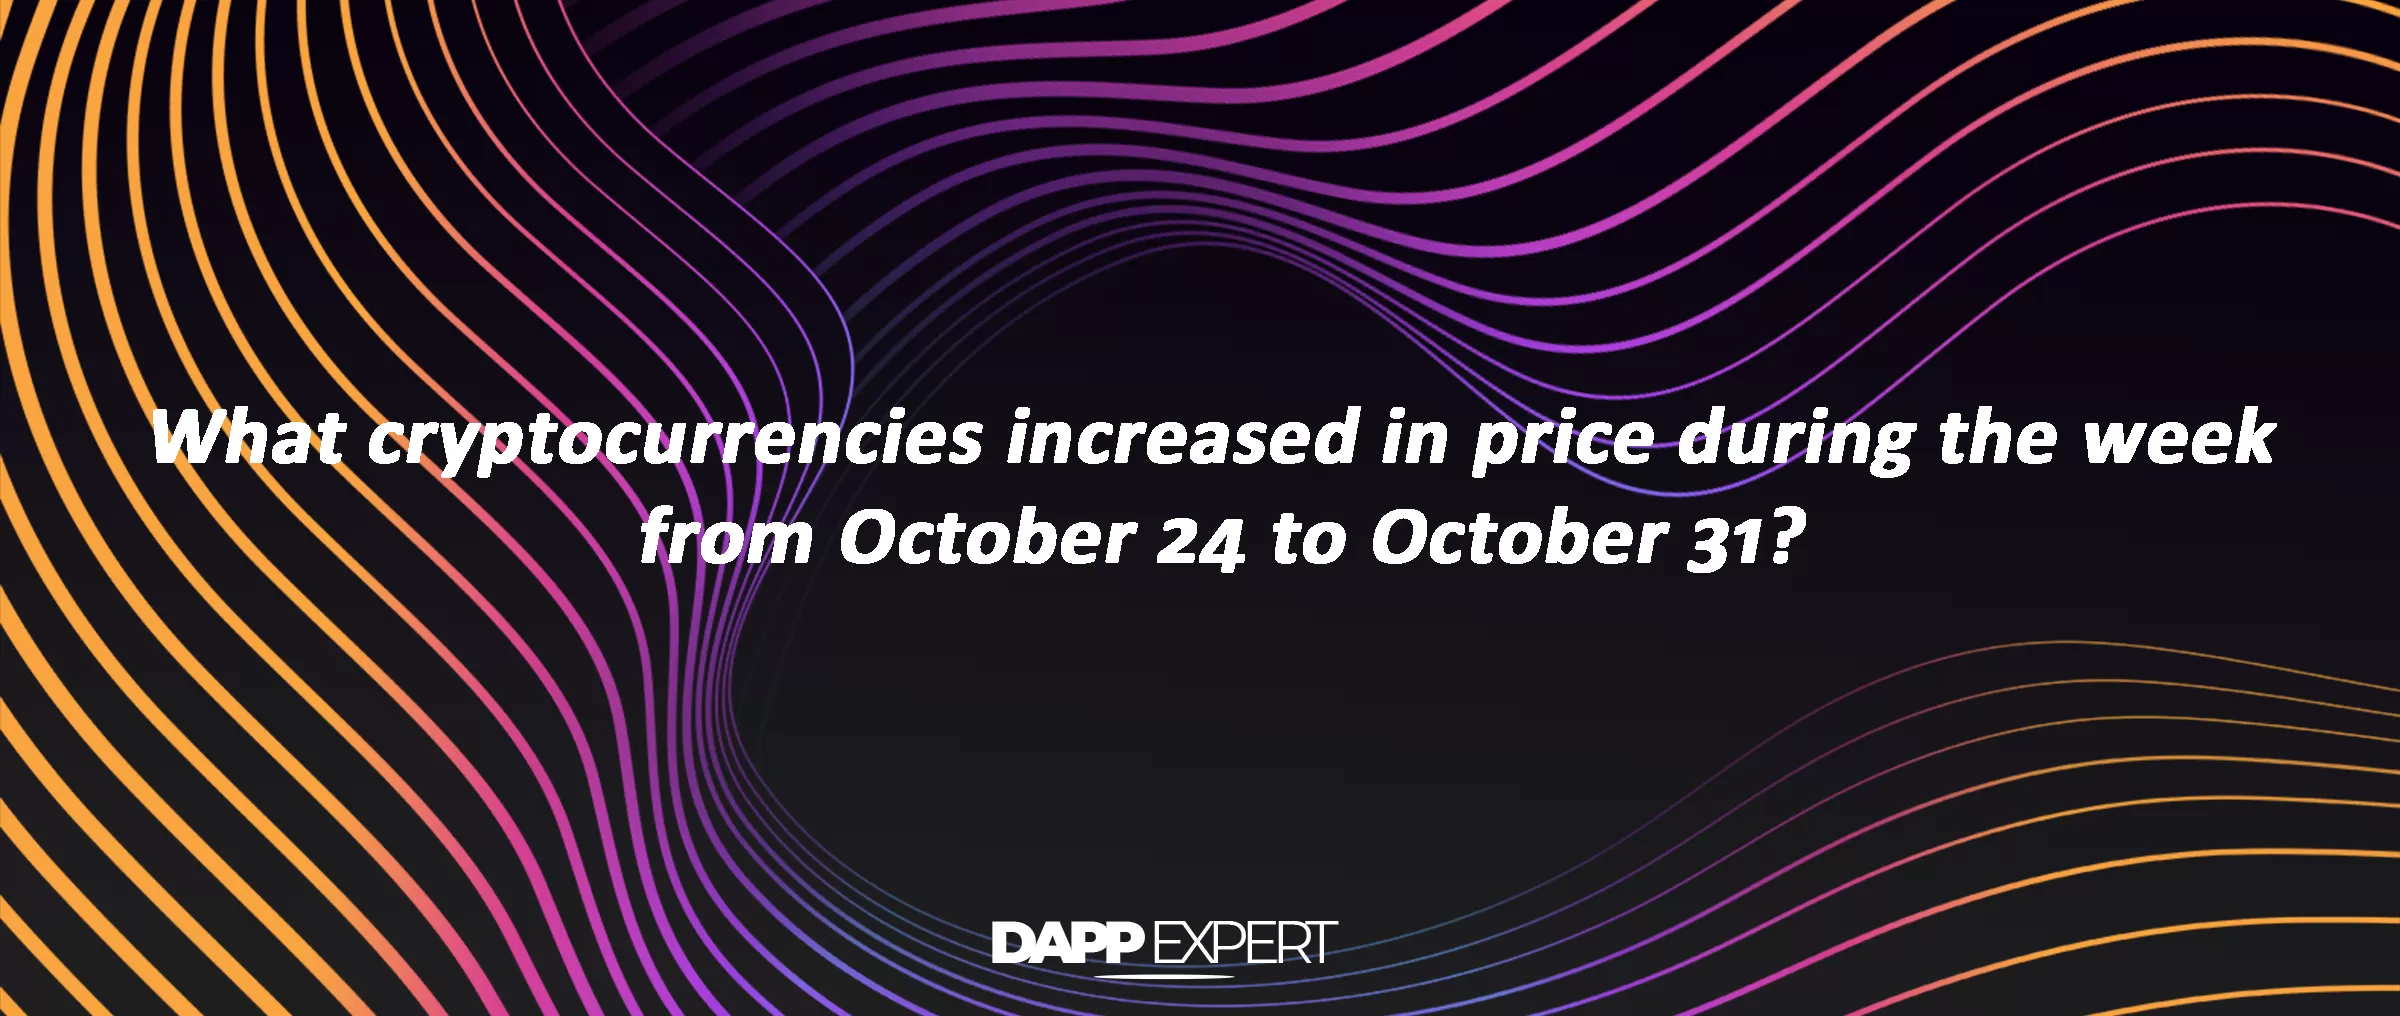 What cryptocurrencies increased in price during the week from October 24 to October 31?